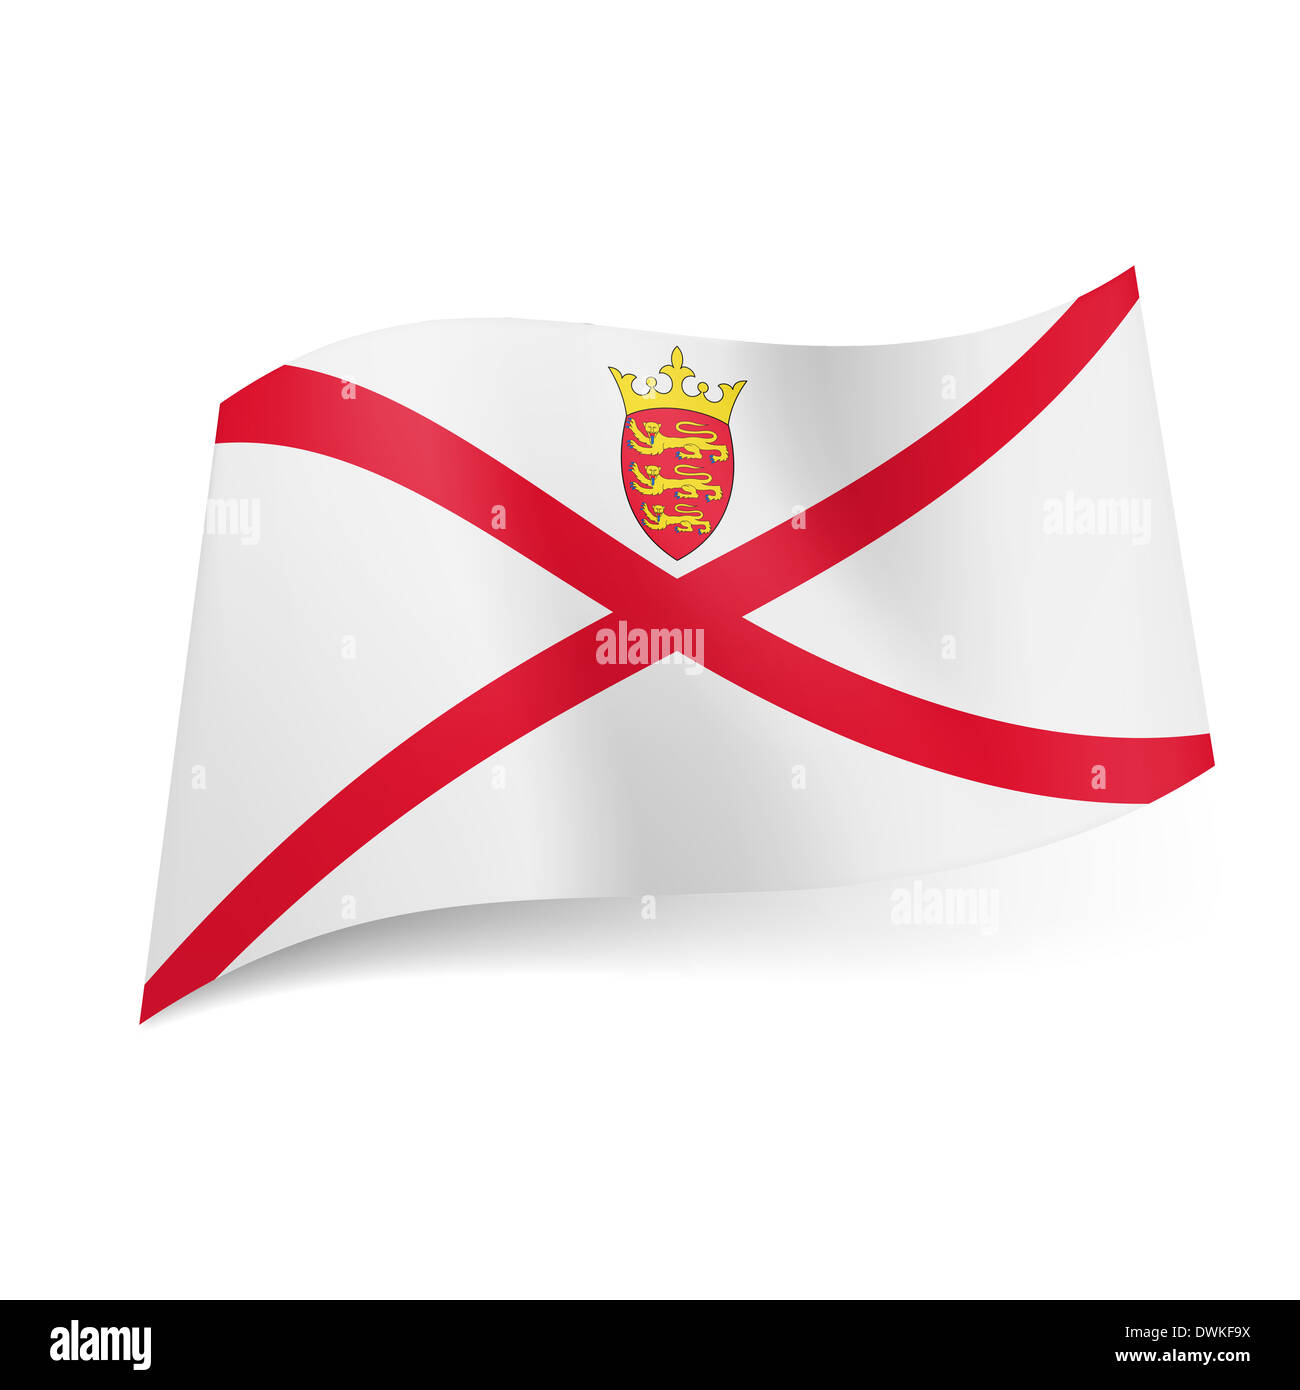 White flag with diagonal red cross stock photography and images - Alamy